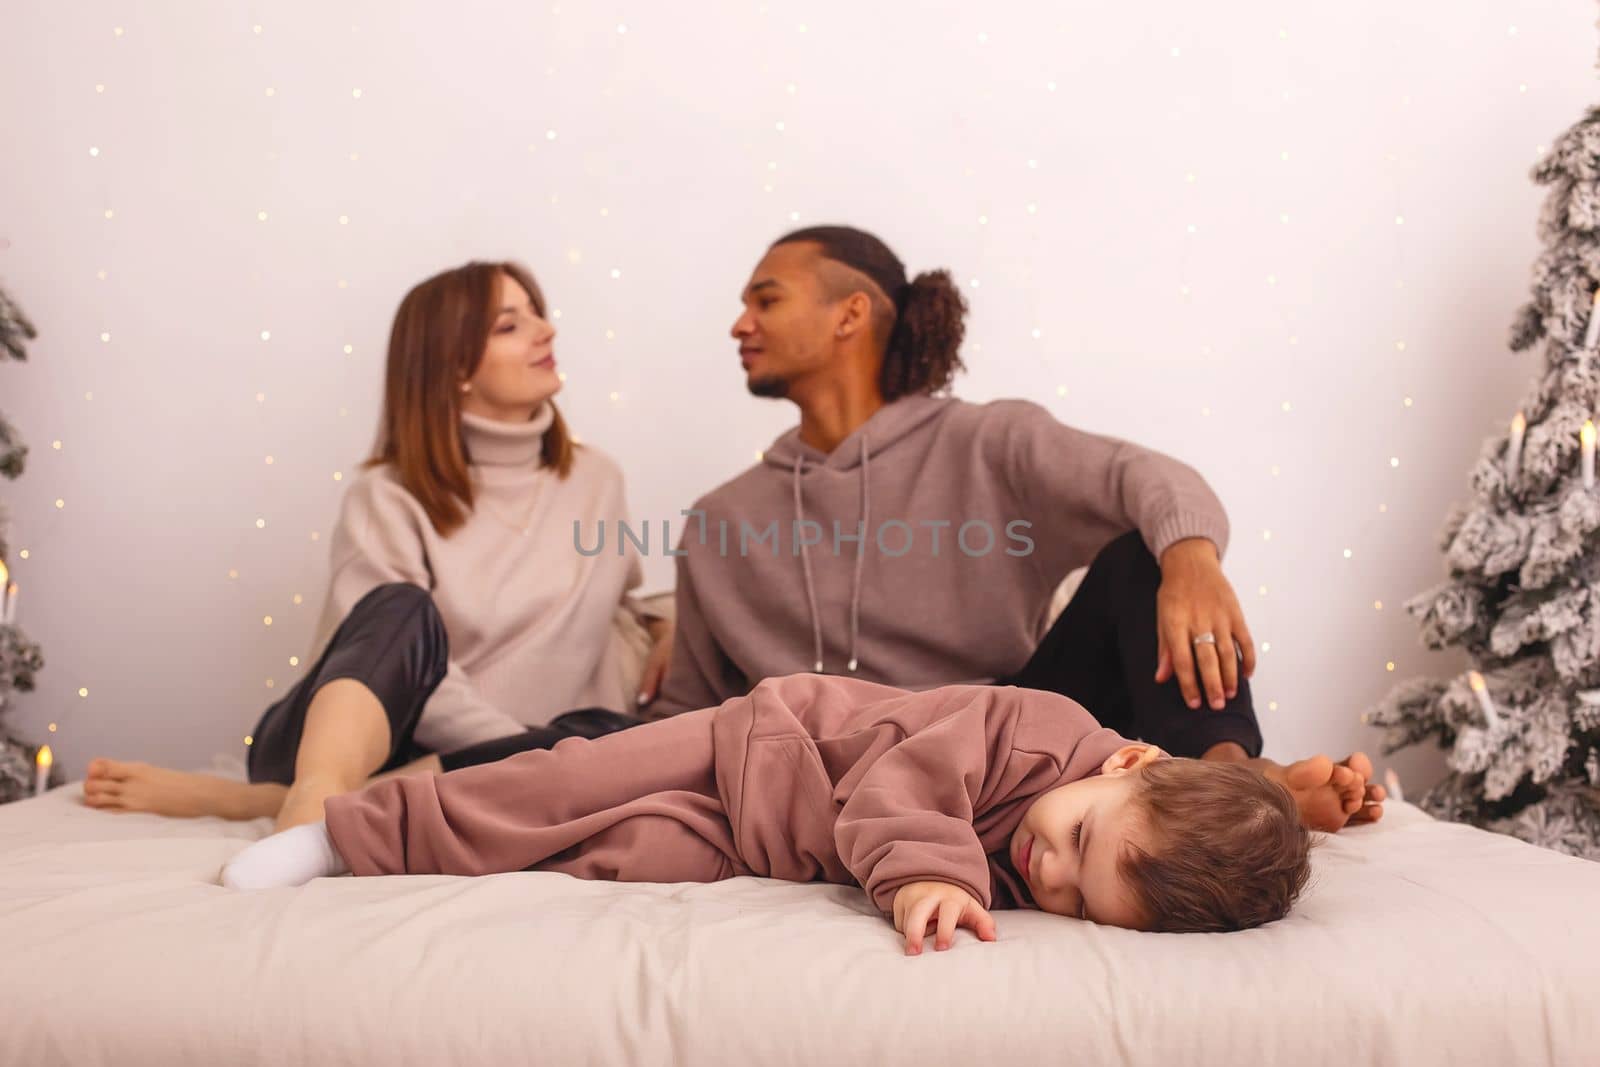 A little boy in a brown house suit , sleep on the bed, young parents kisses in the background, selective focus. Copy space